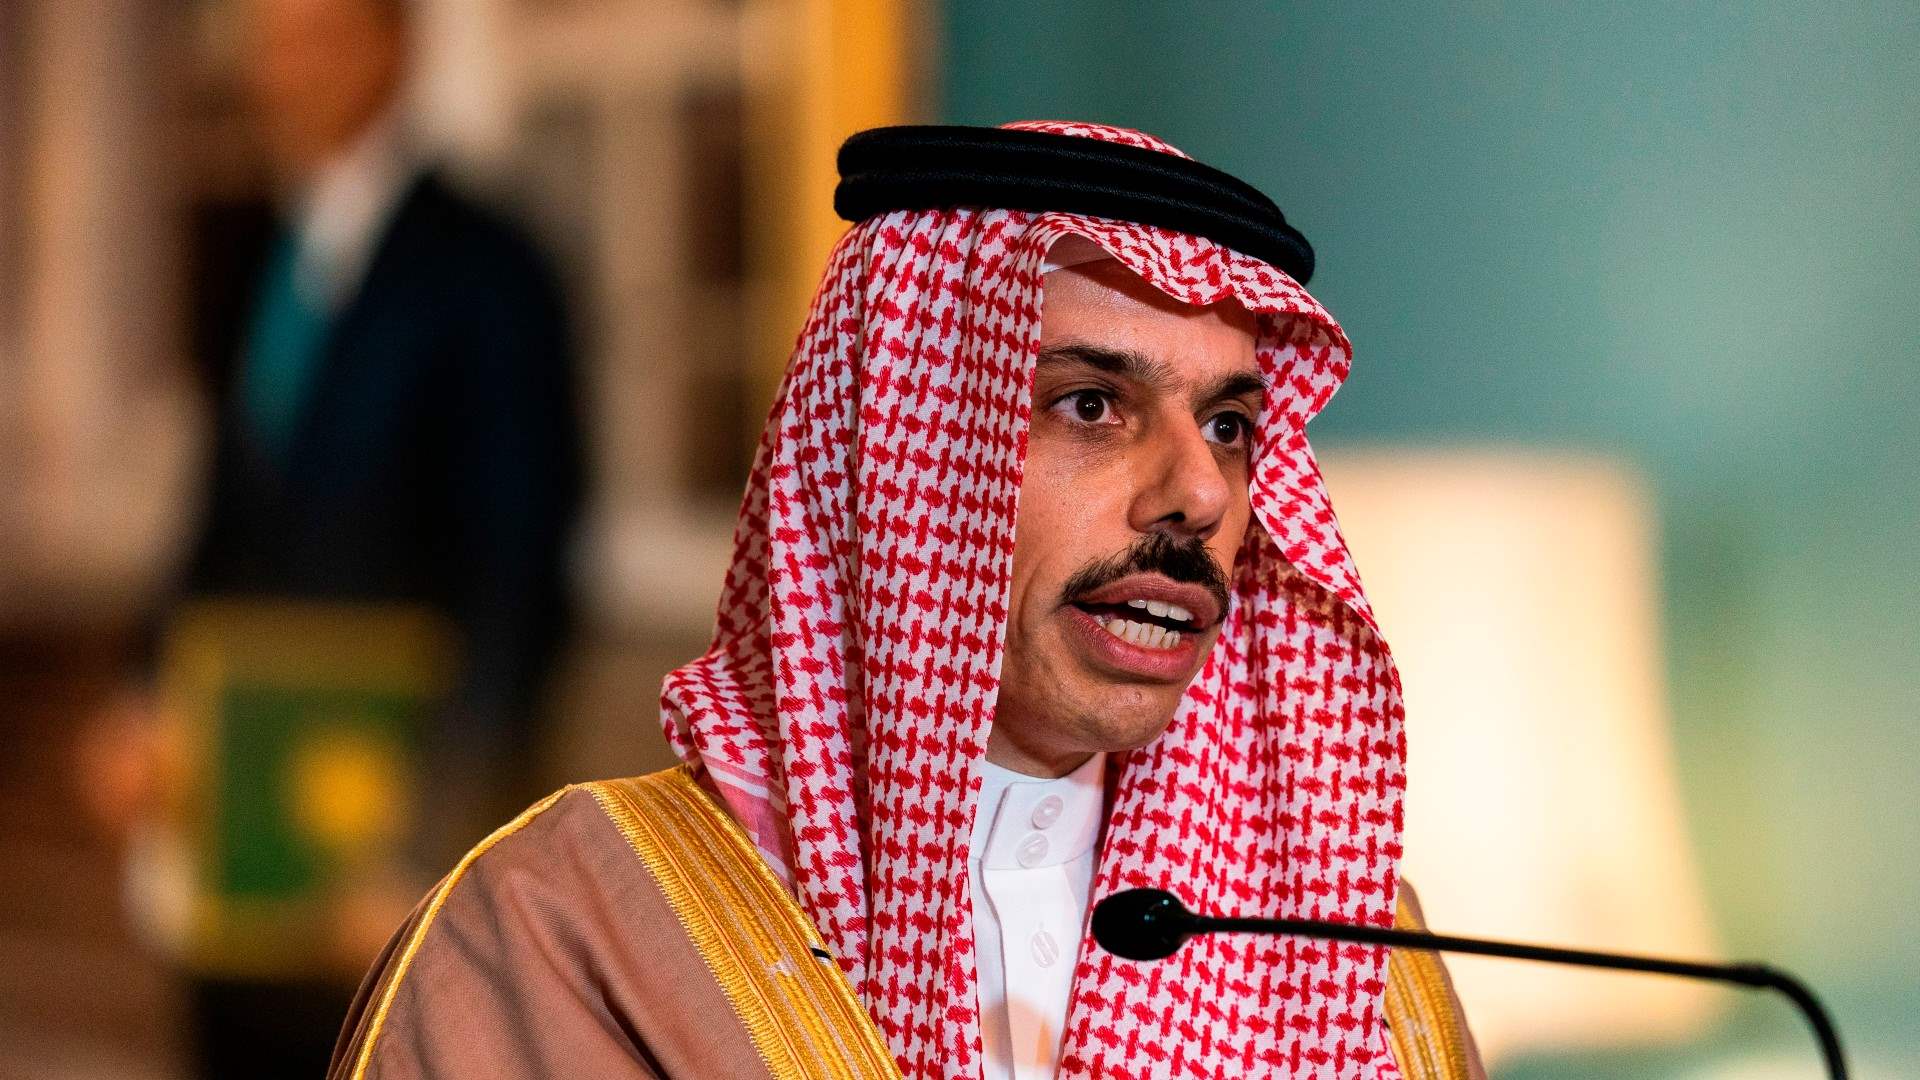 Saudi Foreign Minister: The current truce is insufficient